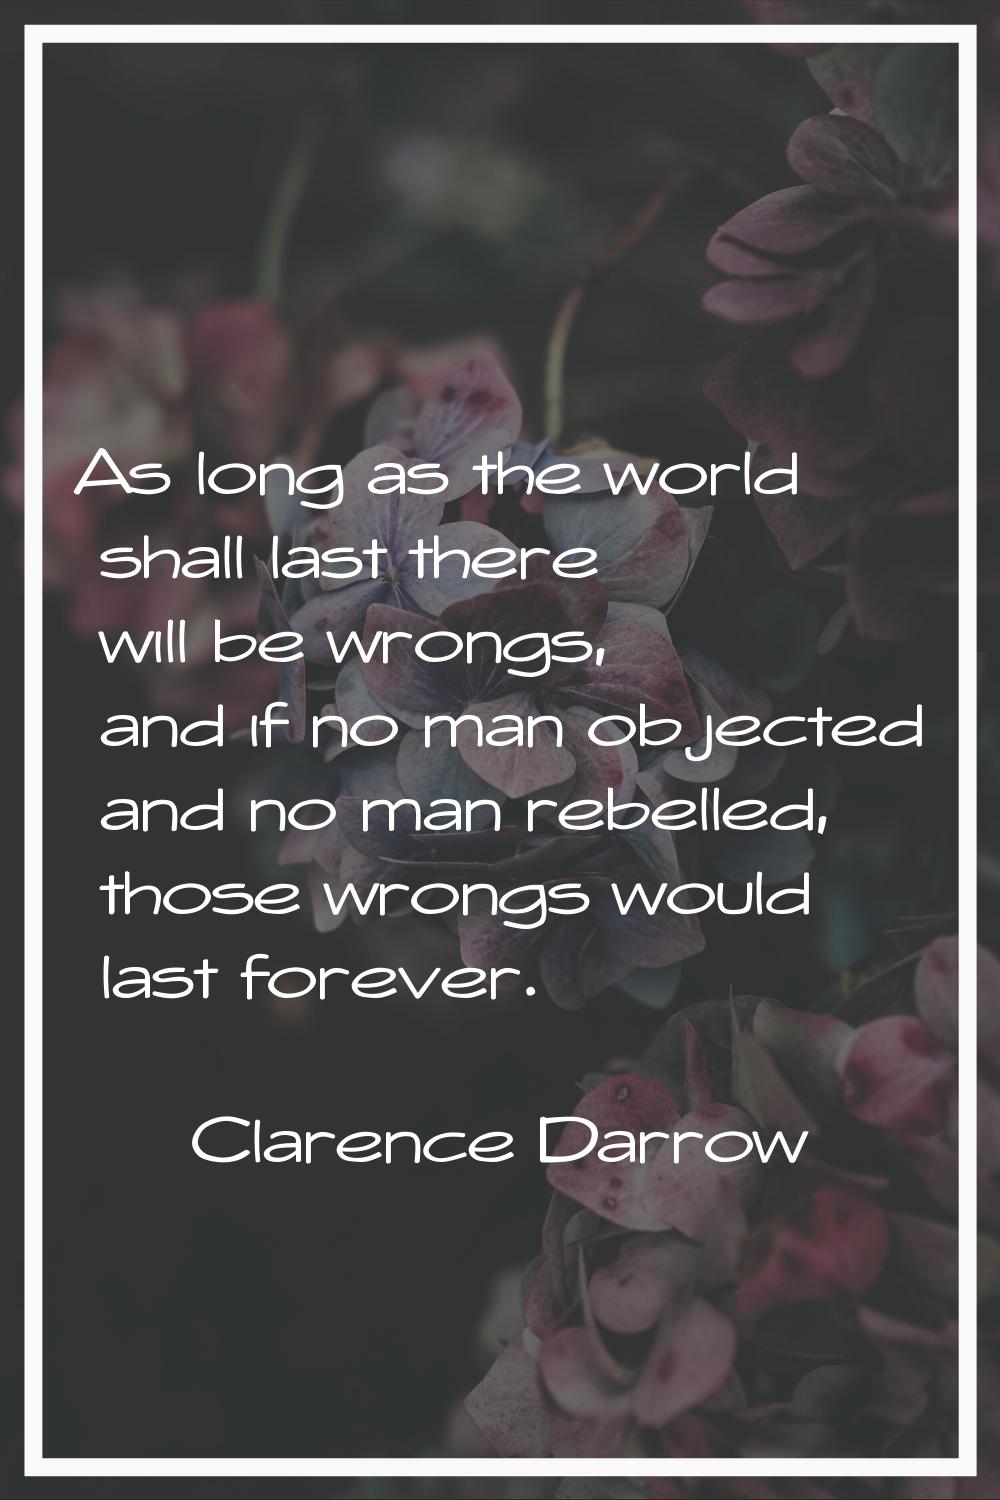 As long as the world shall last there will be wrongs, and if no man objected and no man rebelled, t